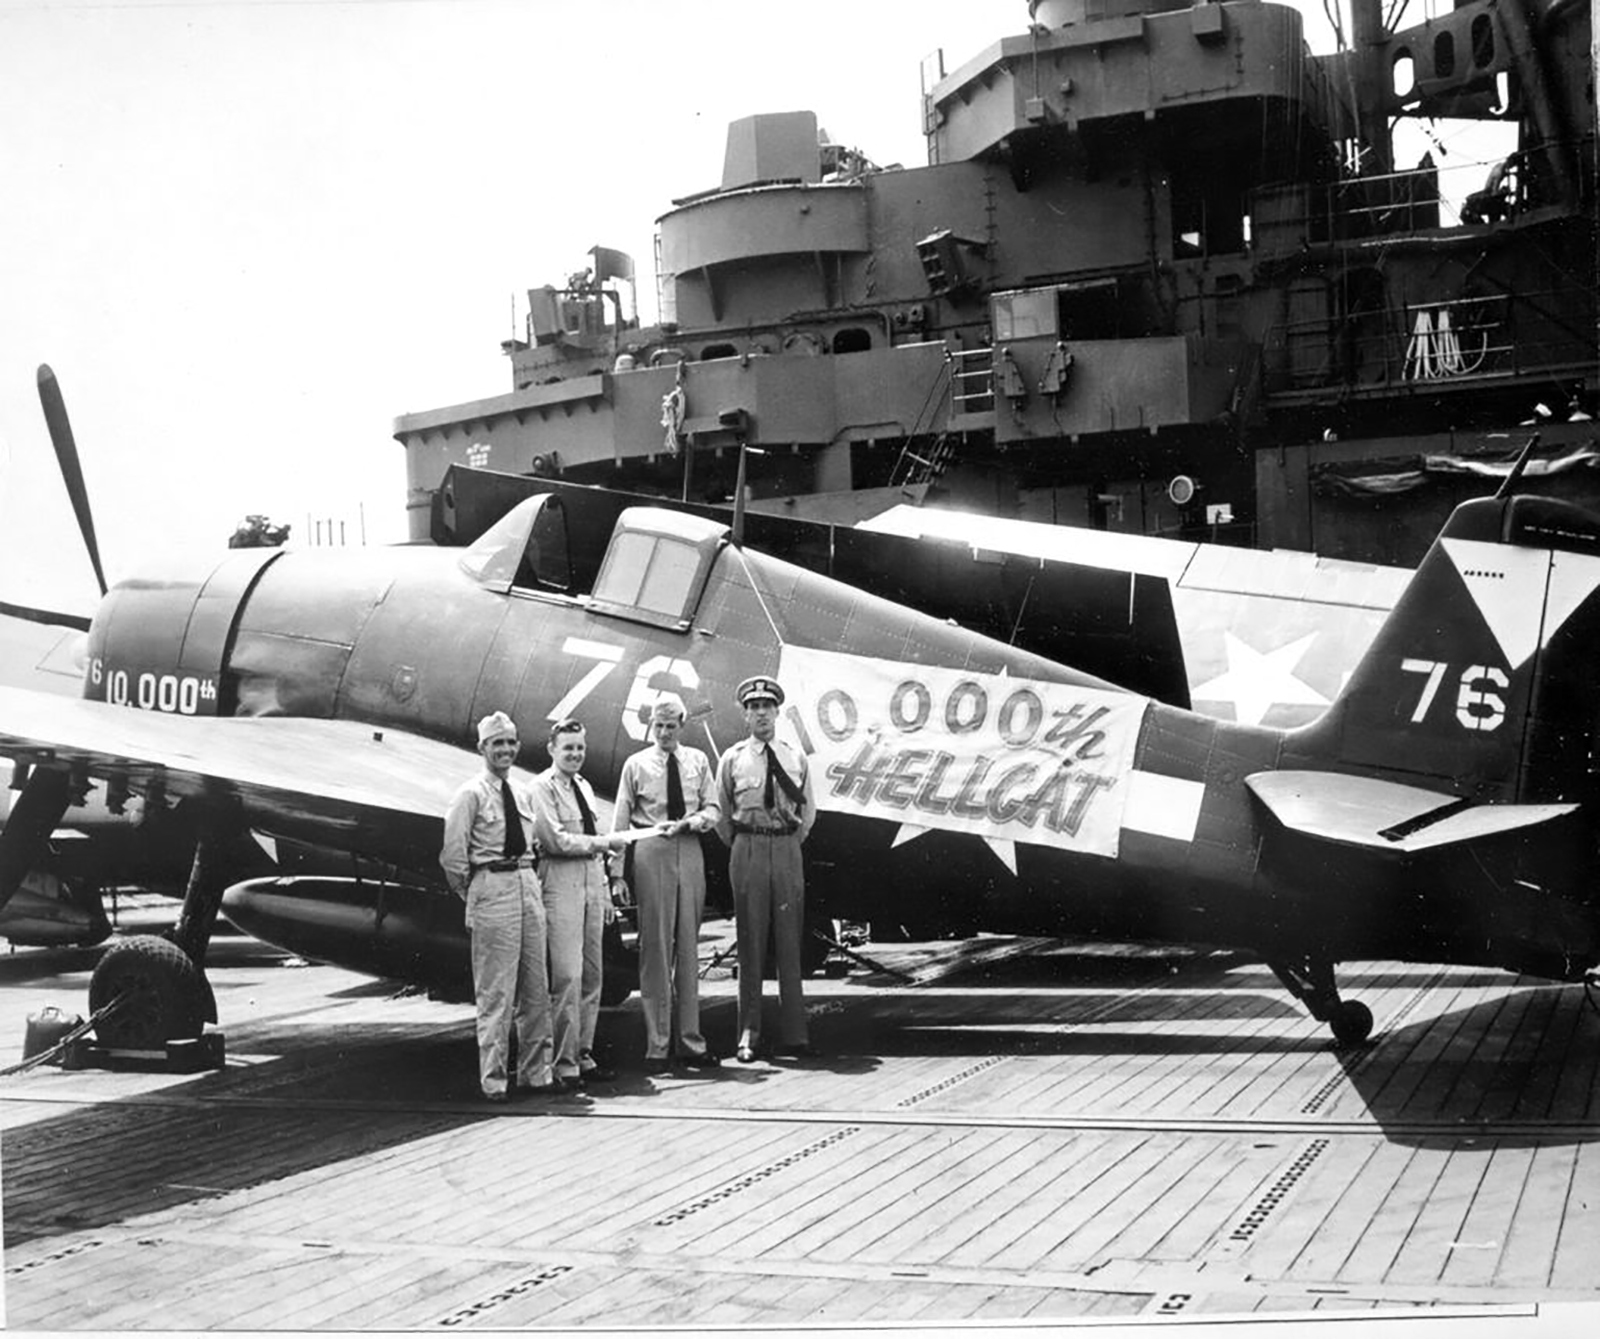 Aboard USS Ticonderoga, Navy Fighting-Bombing Squadron 87 takes possession of the 10,000th F6F Hellcat to be produced, 23 May 1945 at Ulithi.